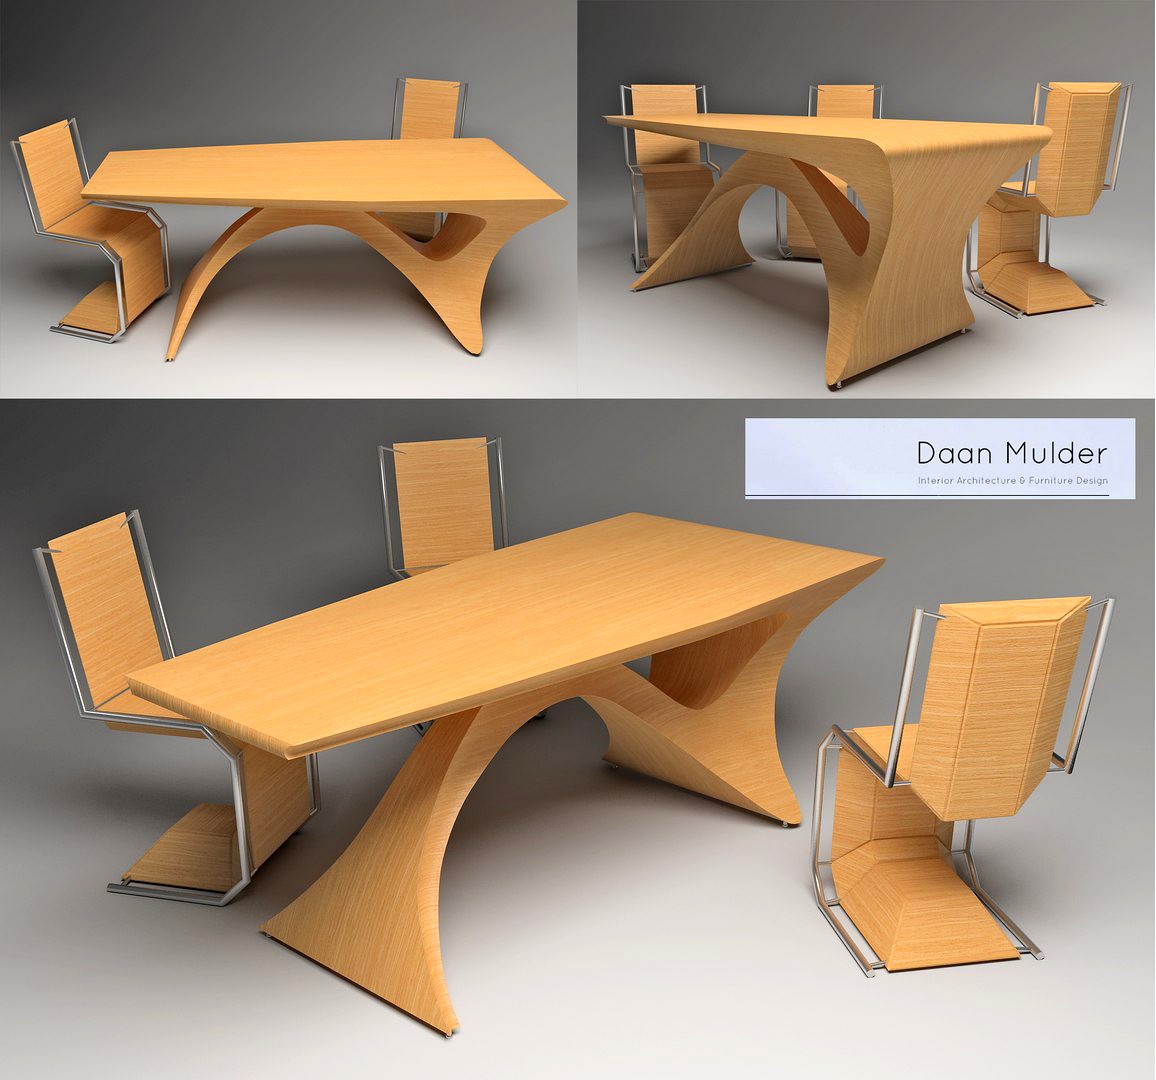 Form Follows Function Table by Daan Mulder